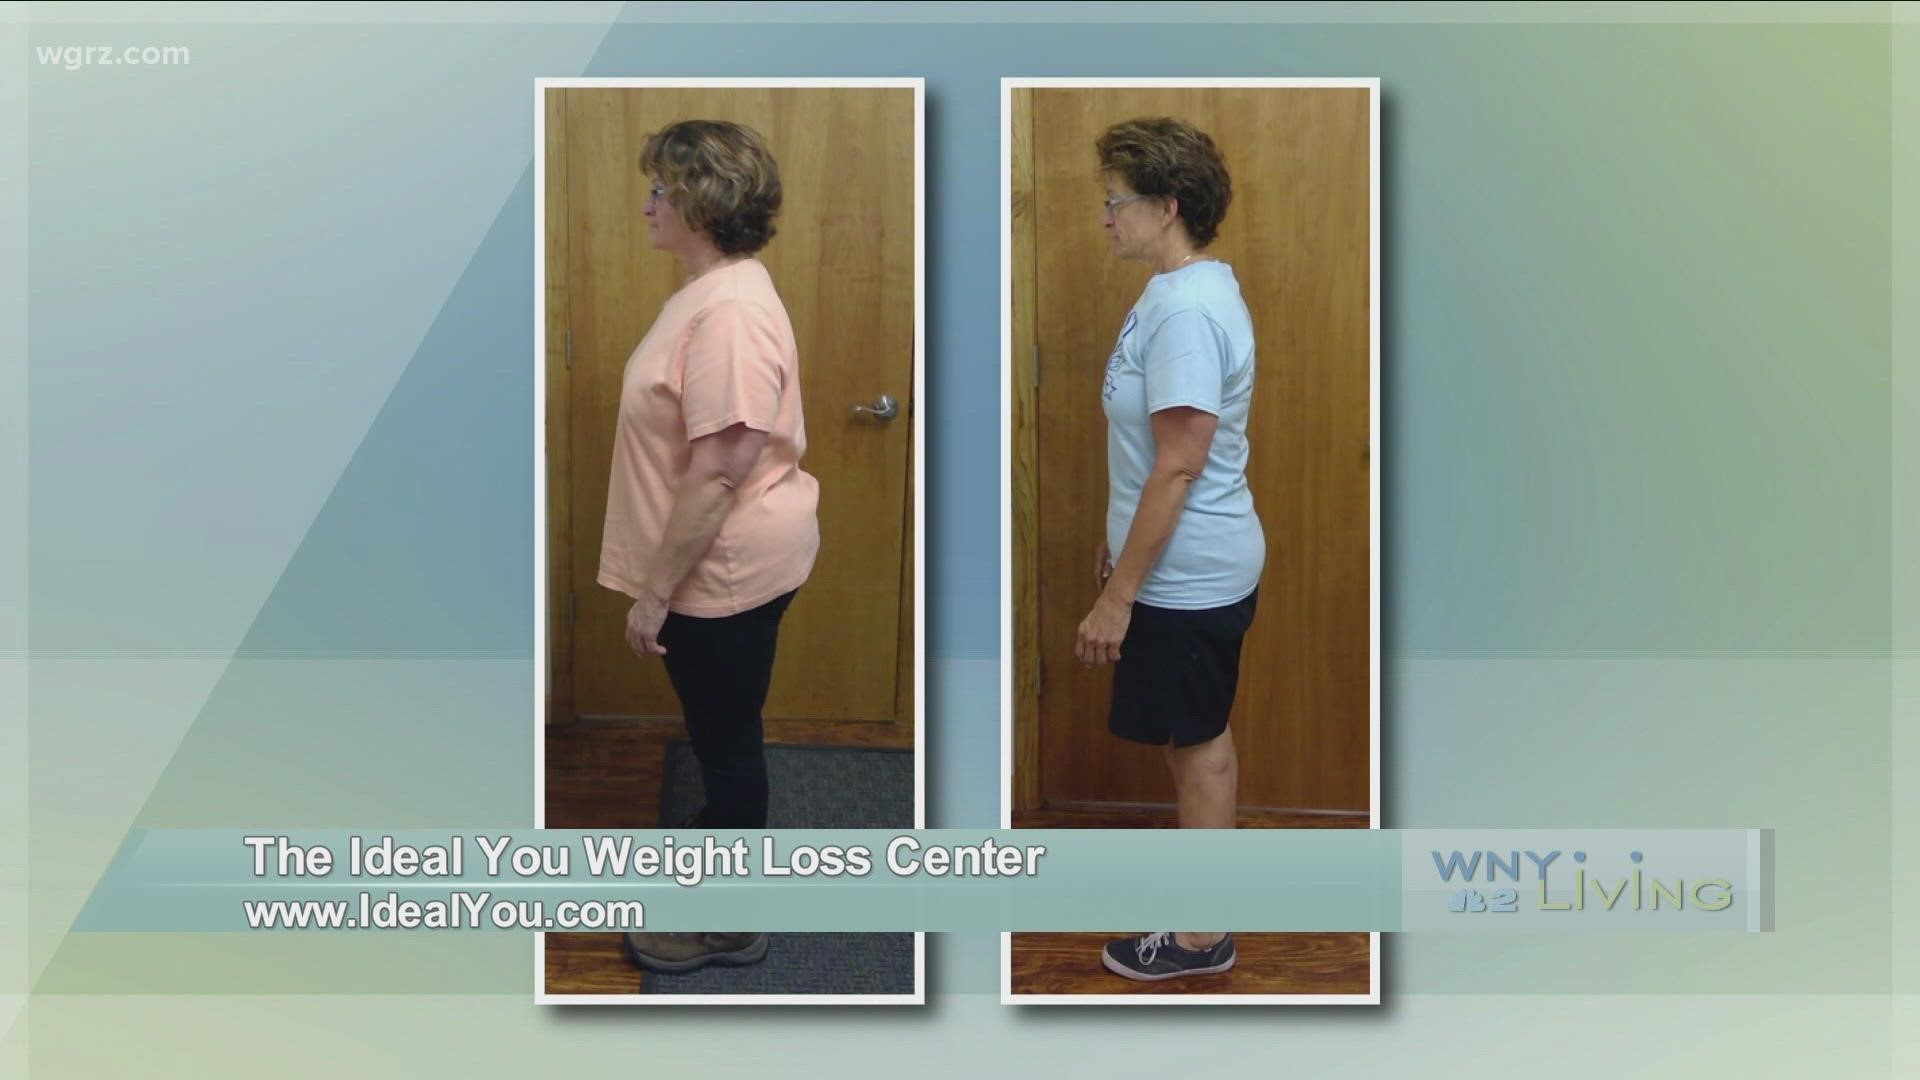 WNY Living - August 14 - The Ideal You Weight Loss Center (THIS VIDEO IS SPONSORED BY THE IDEAL YOU WEIGHT LOSS CENTER)